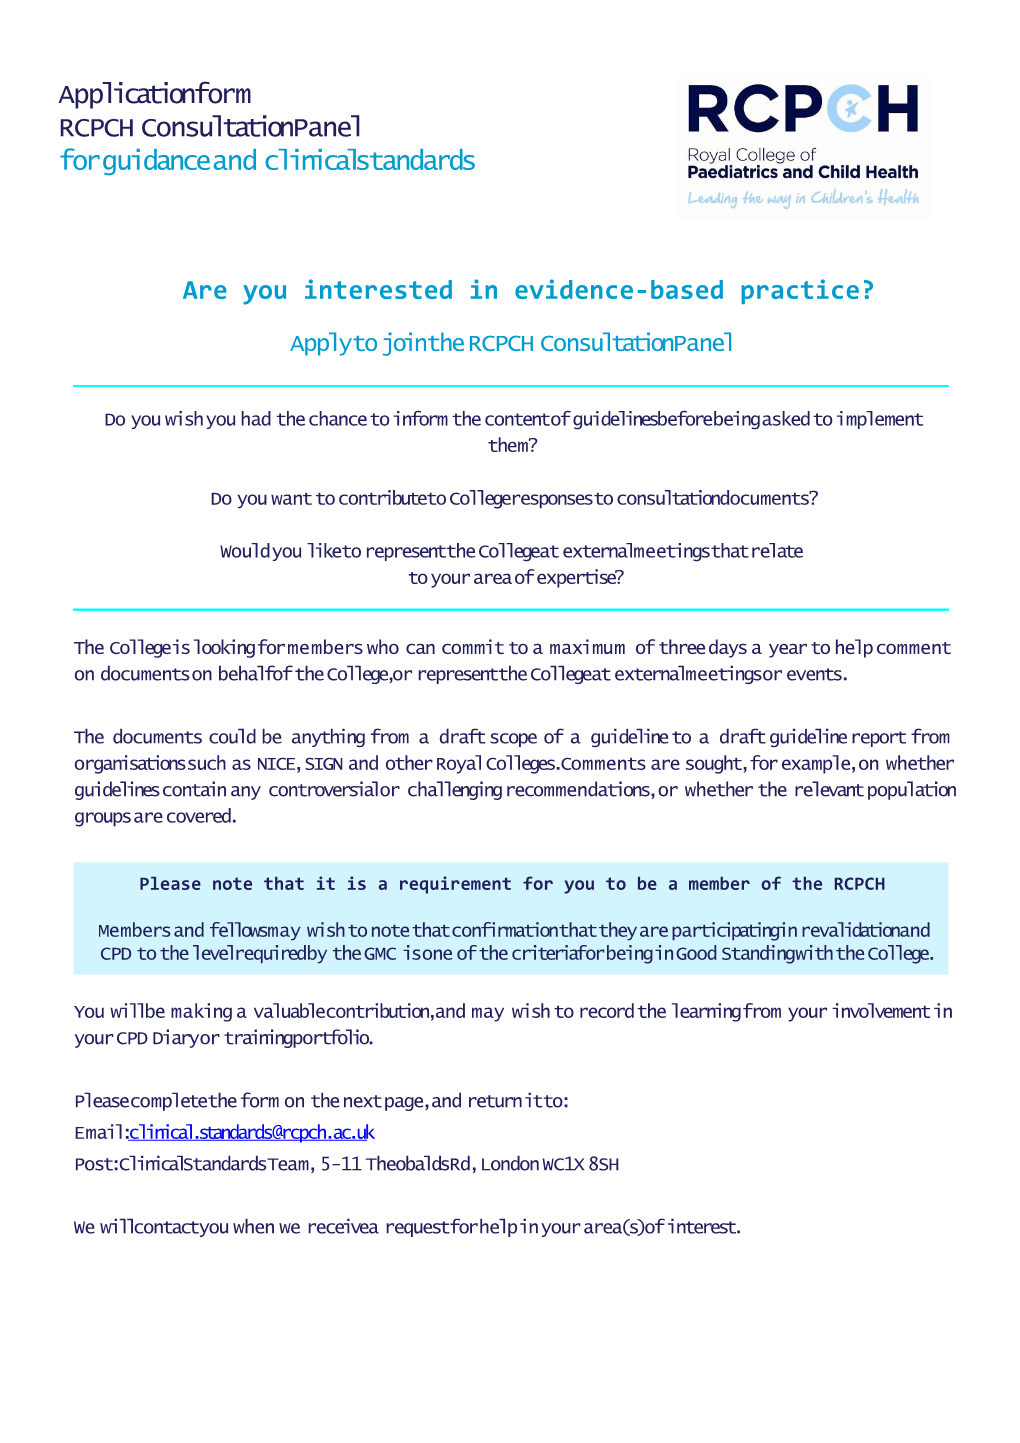 Are You Interested in Evidence-Based Practice?